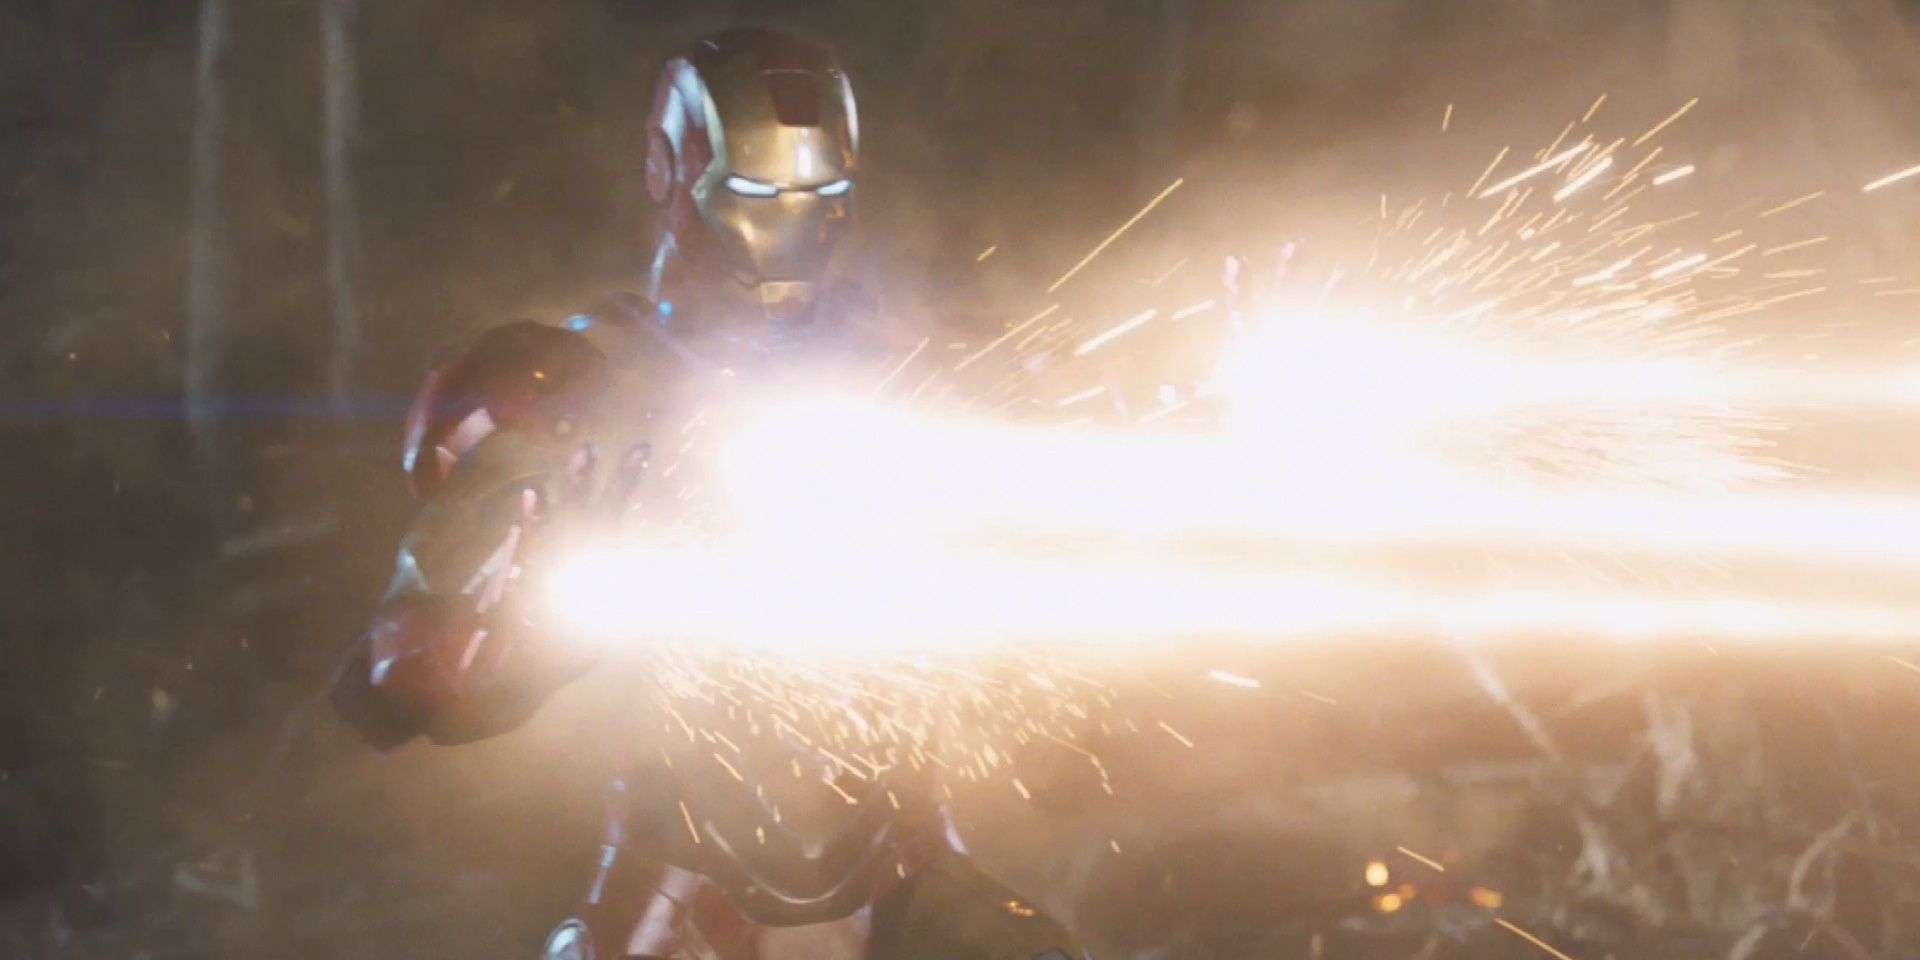 Iron Man blasting his repulsors during a scuffle against Thor in the Avengers